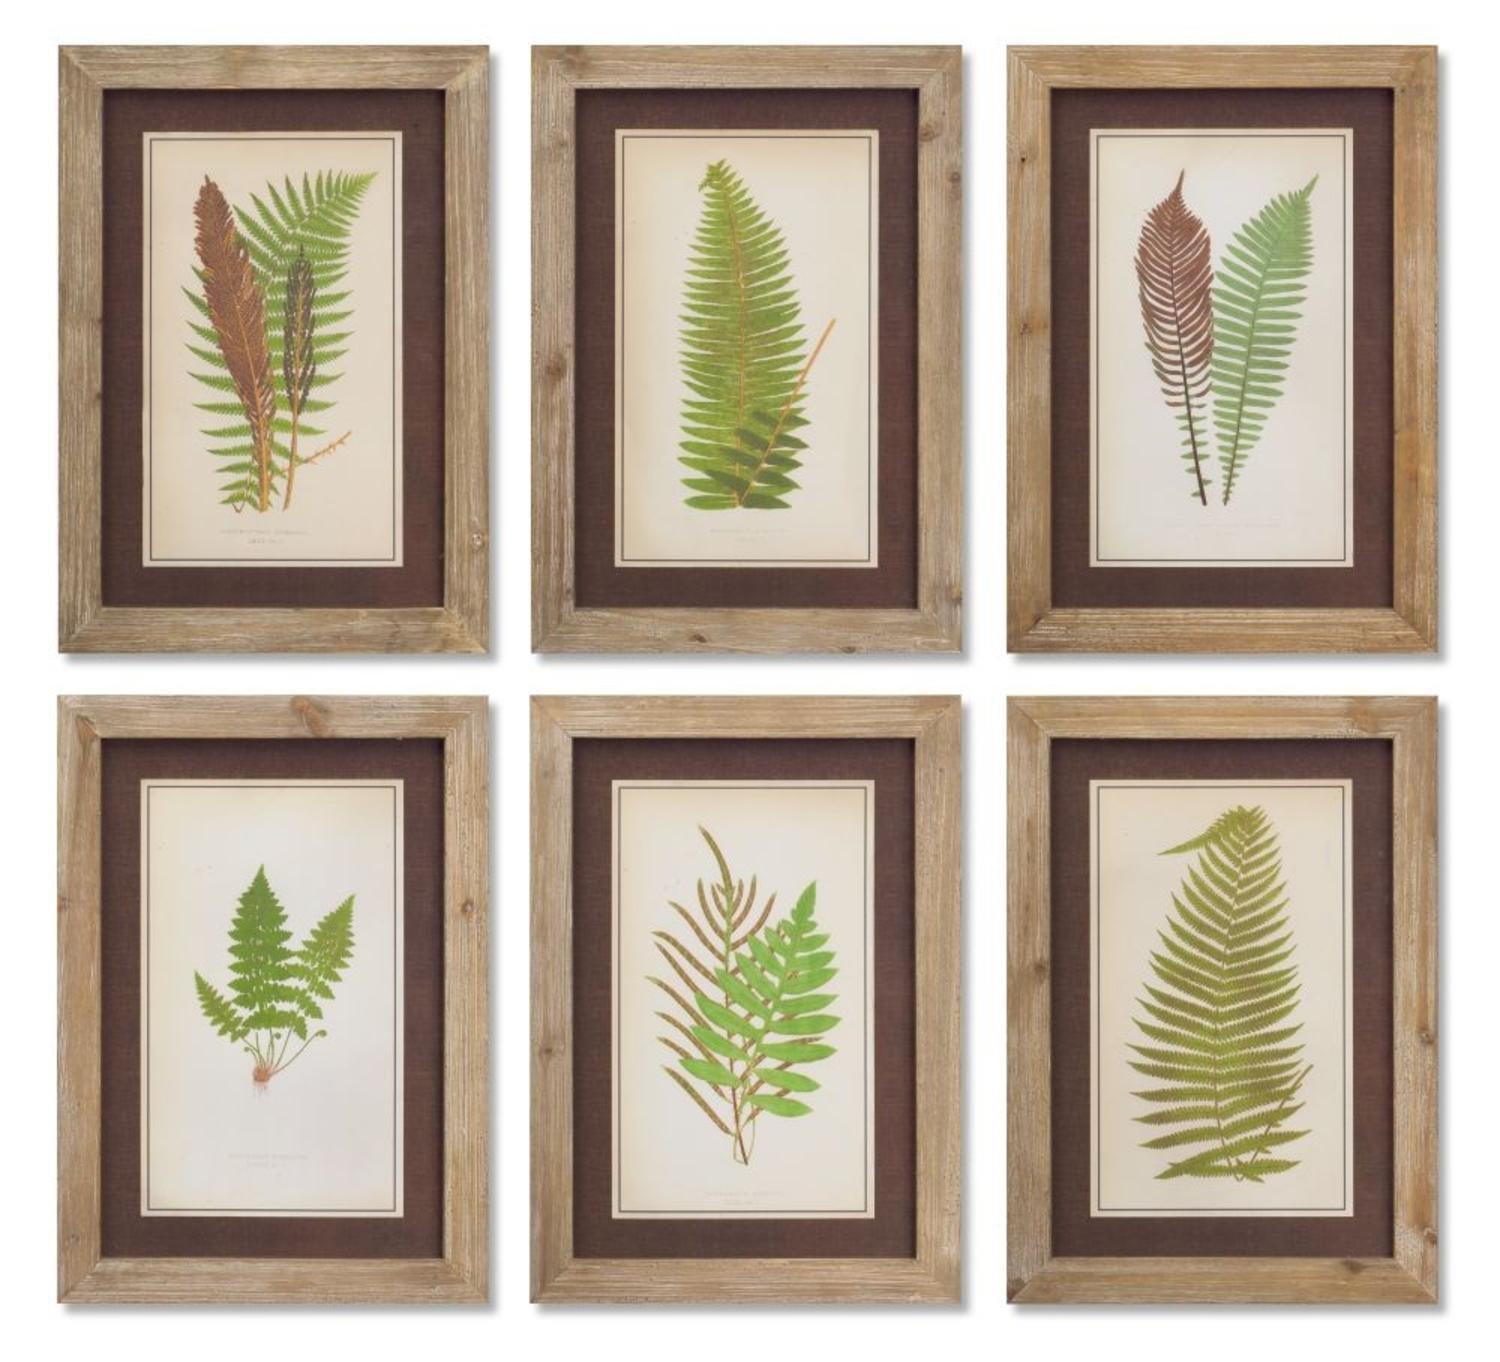 6×4 Picture Frame with Fern Pattern